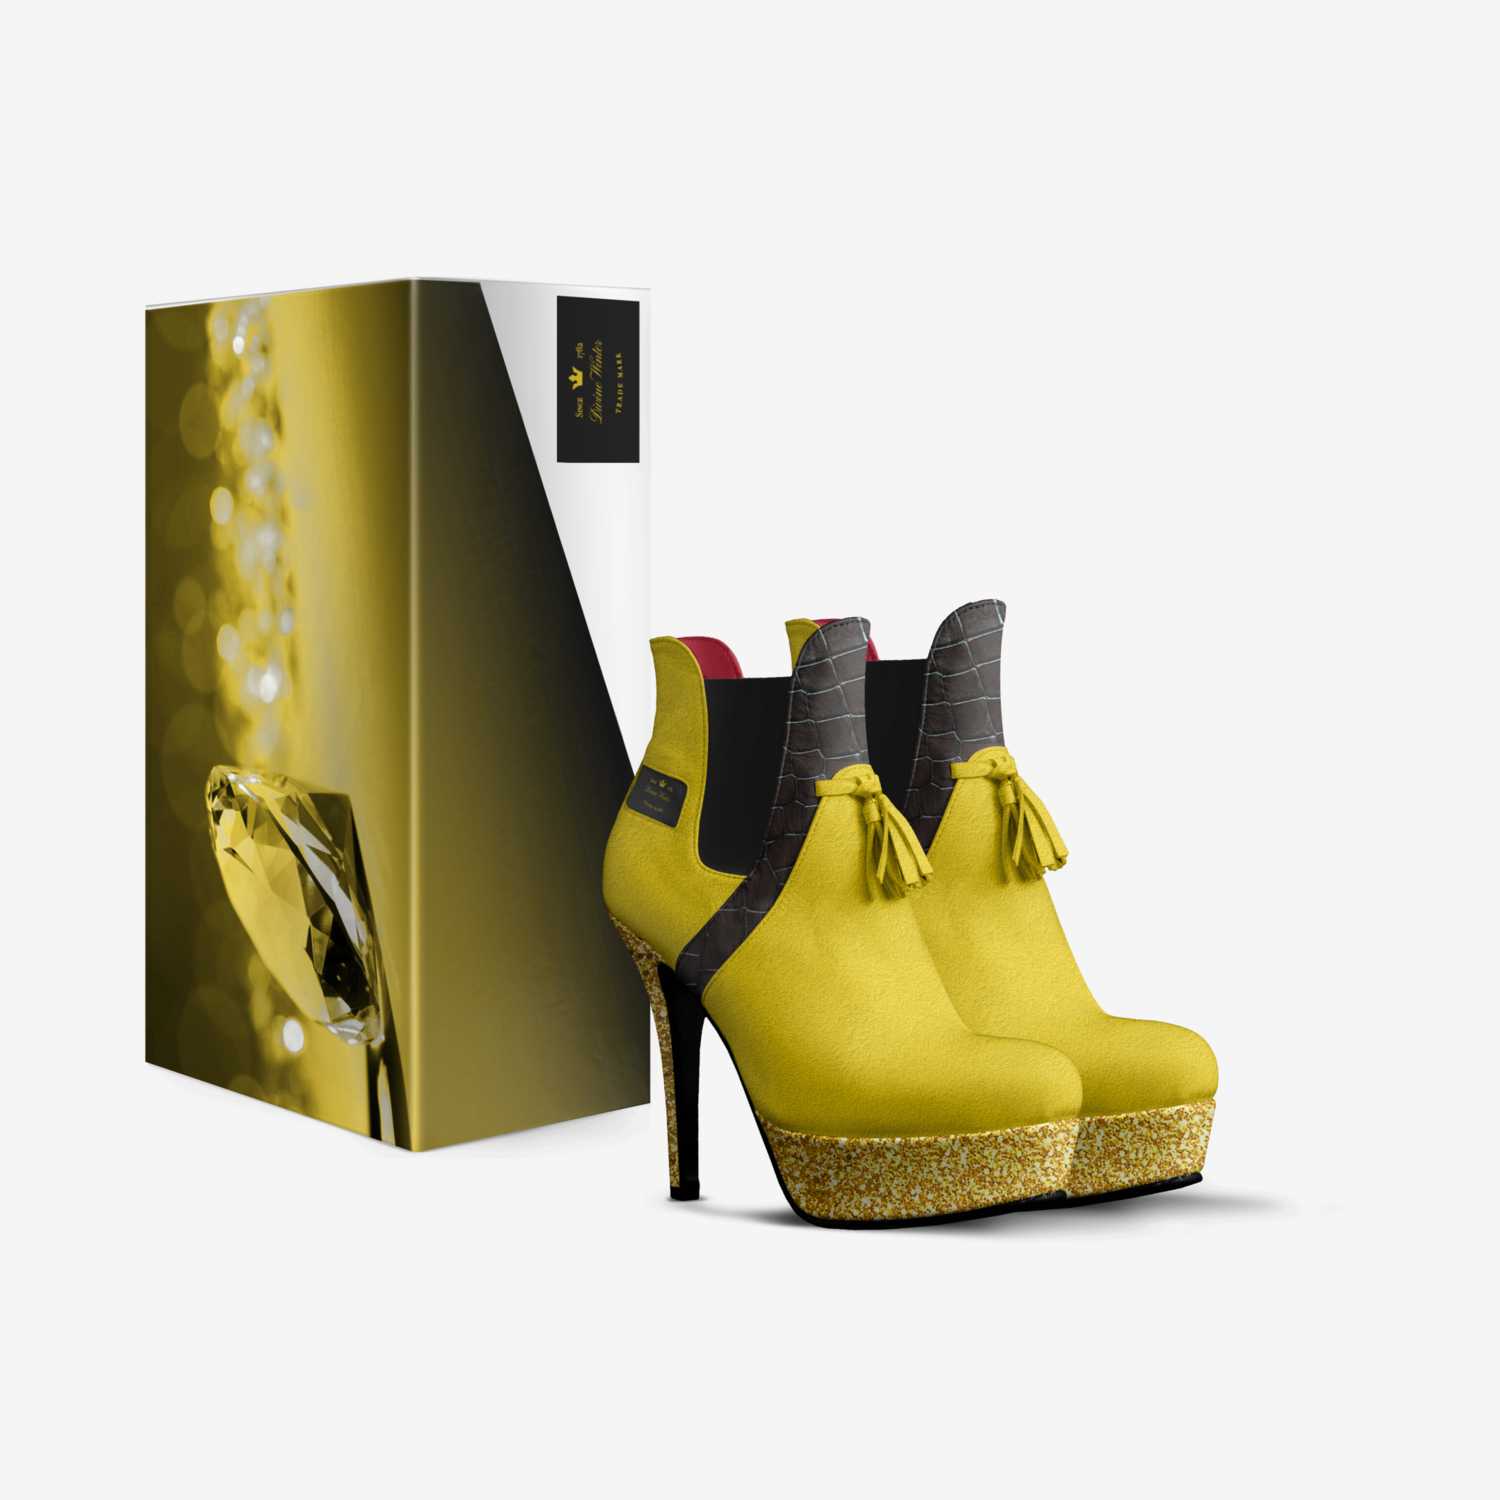 Divine Winter custom made in Italy shoes by Amira Bady | Box view